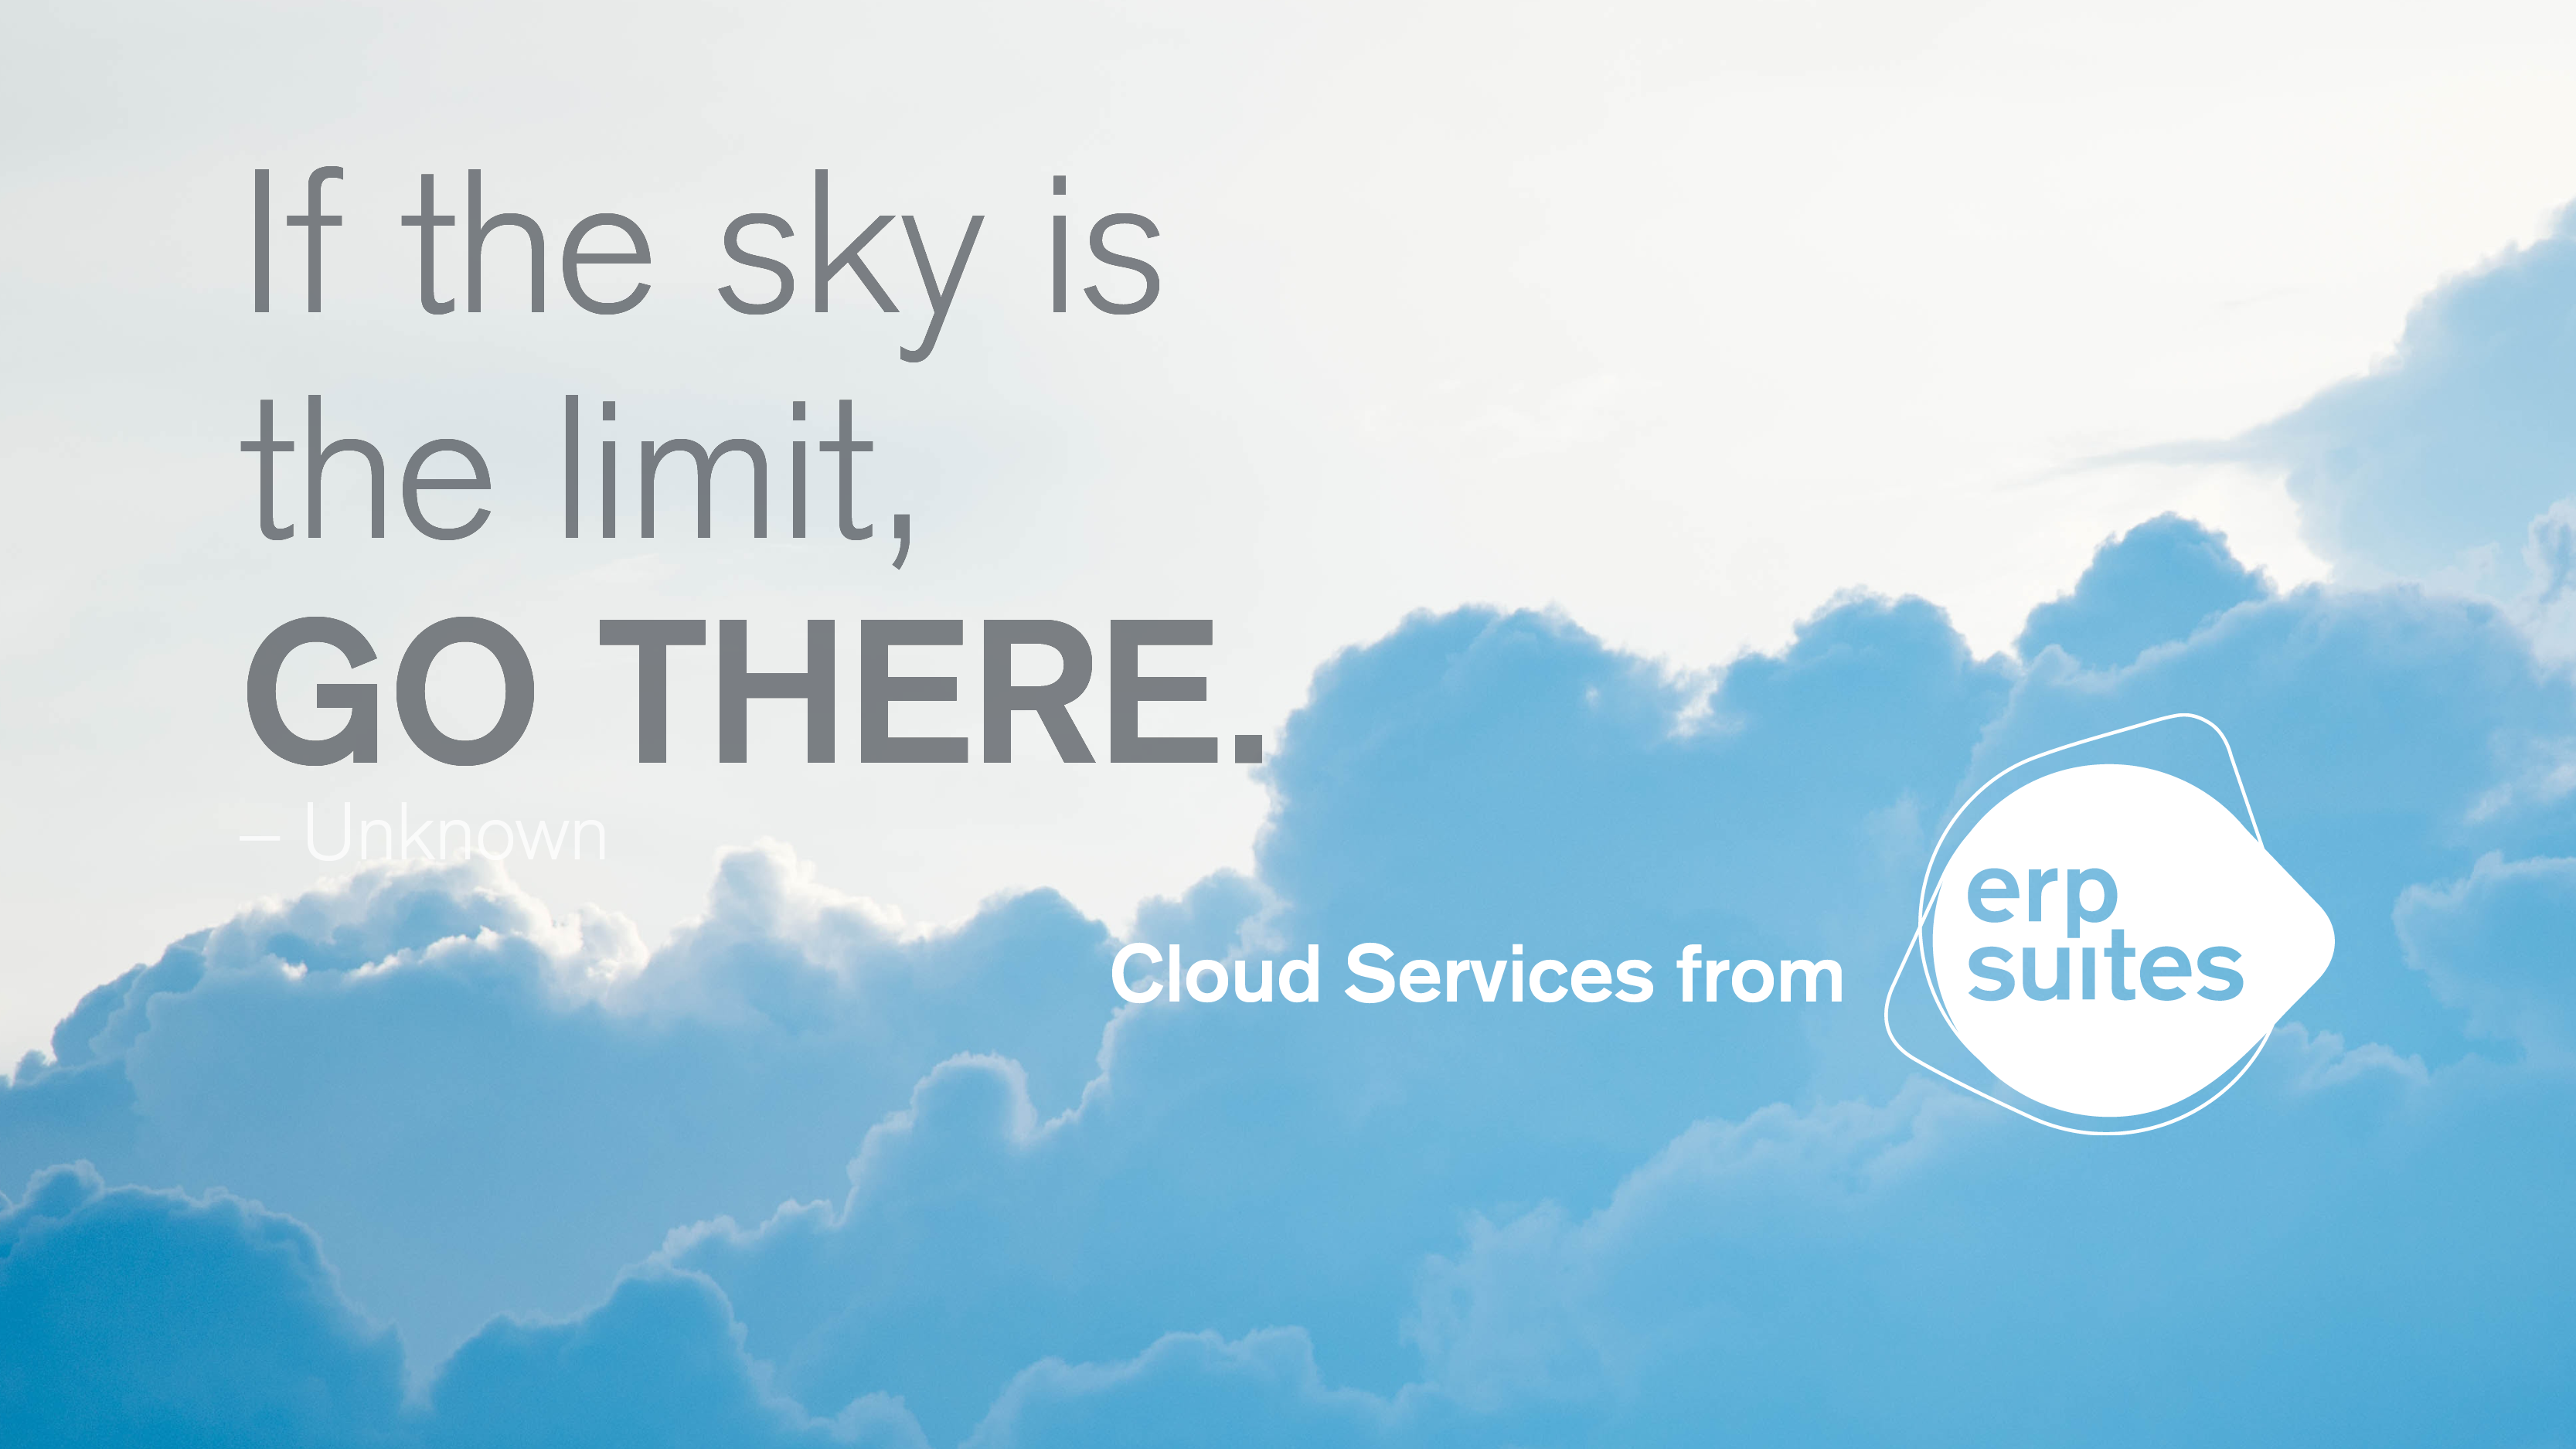 Quote inspiring move to the cloud